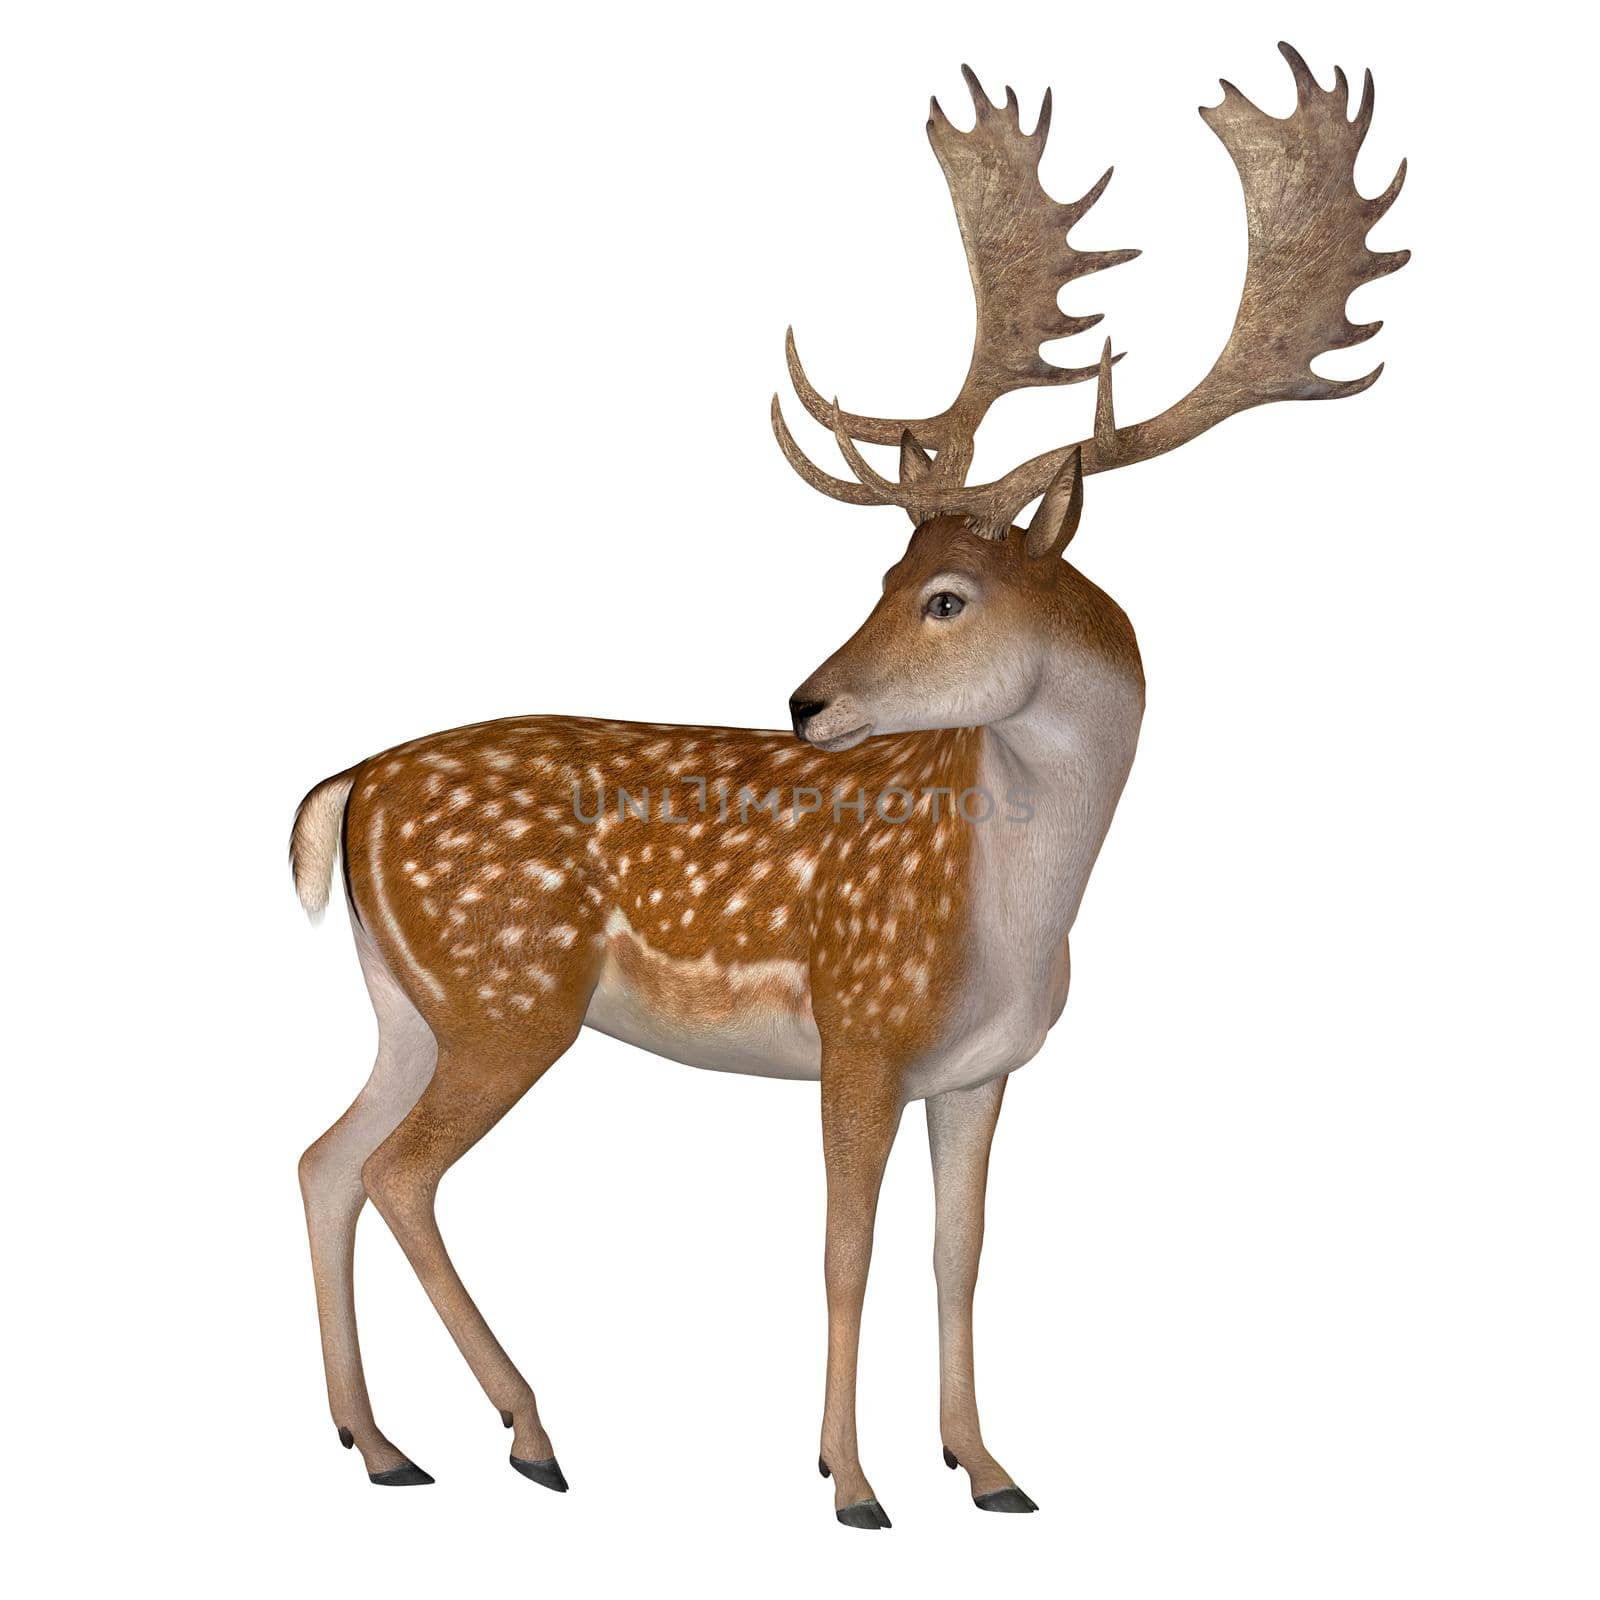 The Fallow deer can be traced back to Pleistocene Period and the species now lives in Europe.